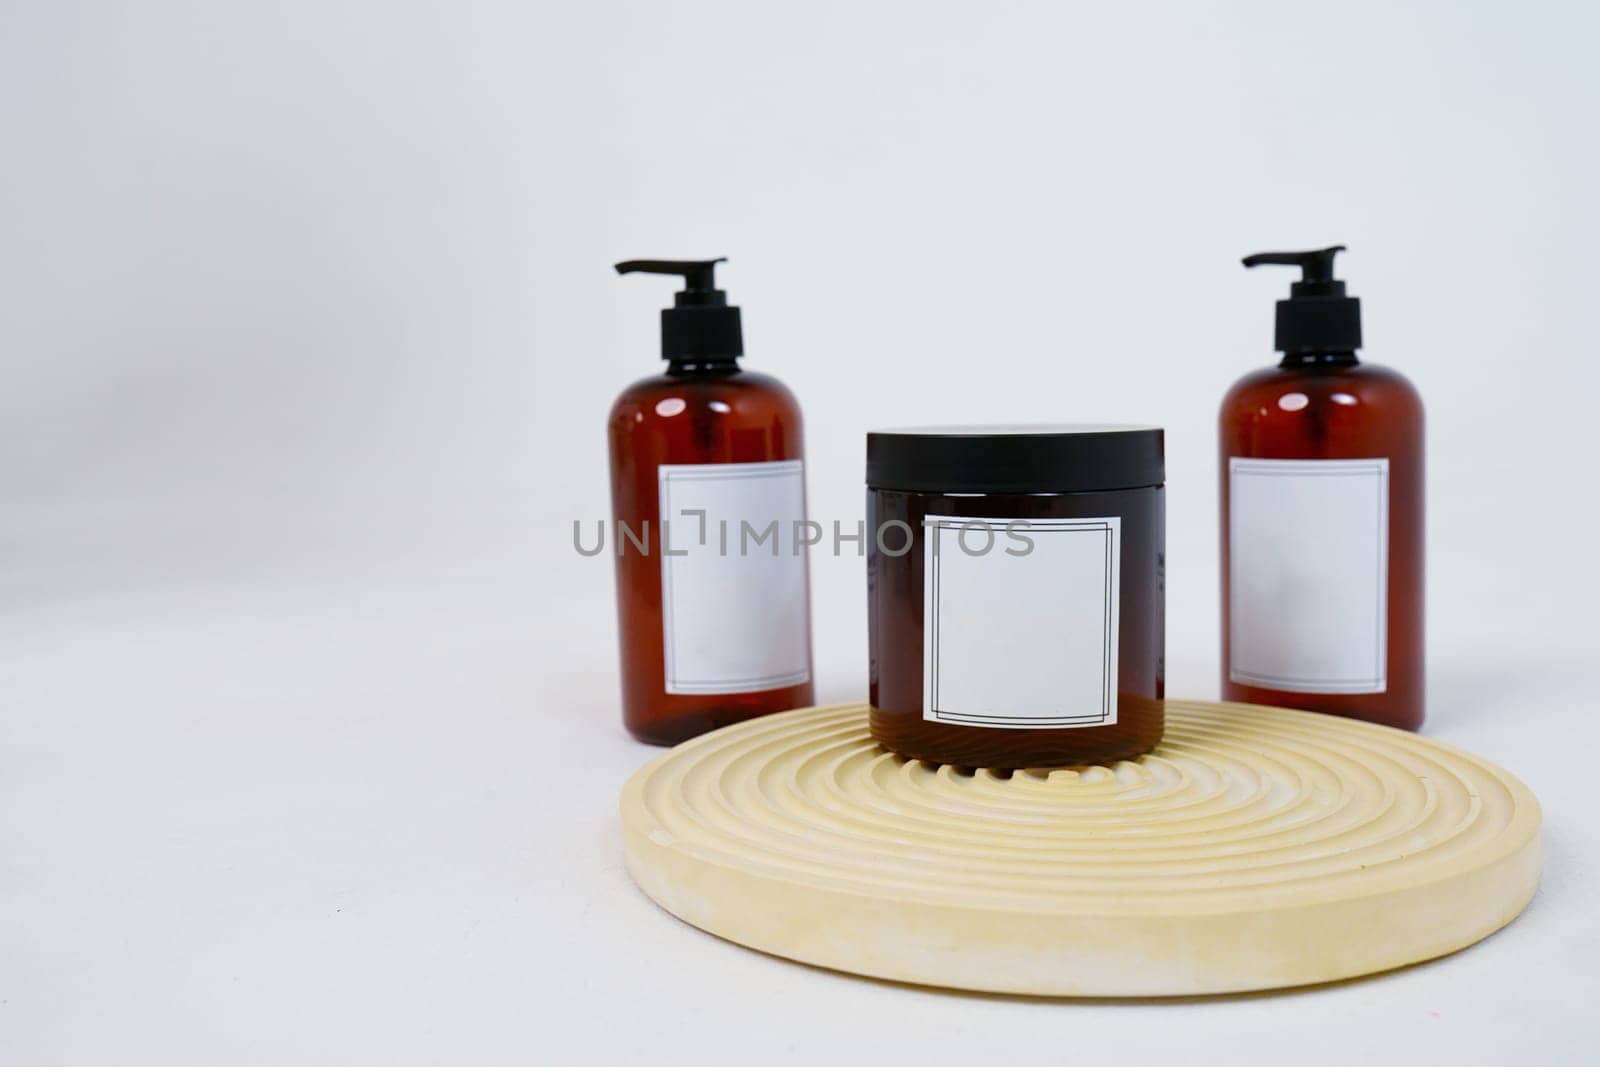 Body care. two bottles with a dispenser and a jar of body cream on a geometric stand on a light gray background. Advertising concept. High quality photo